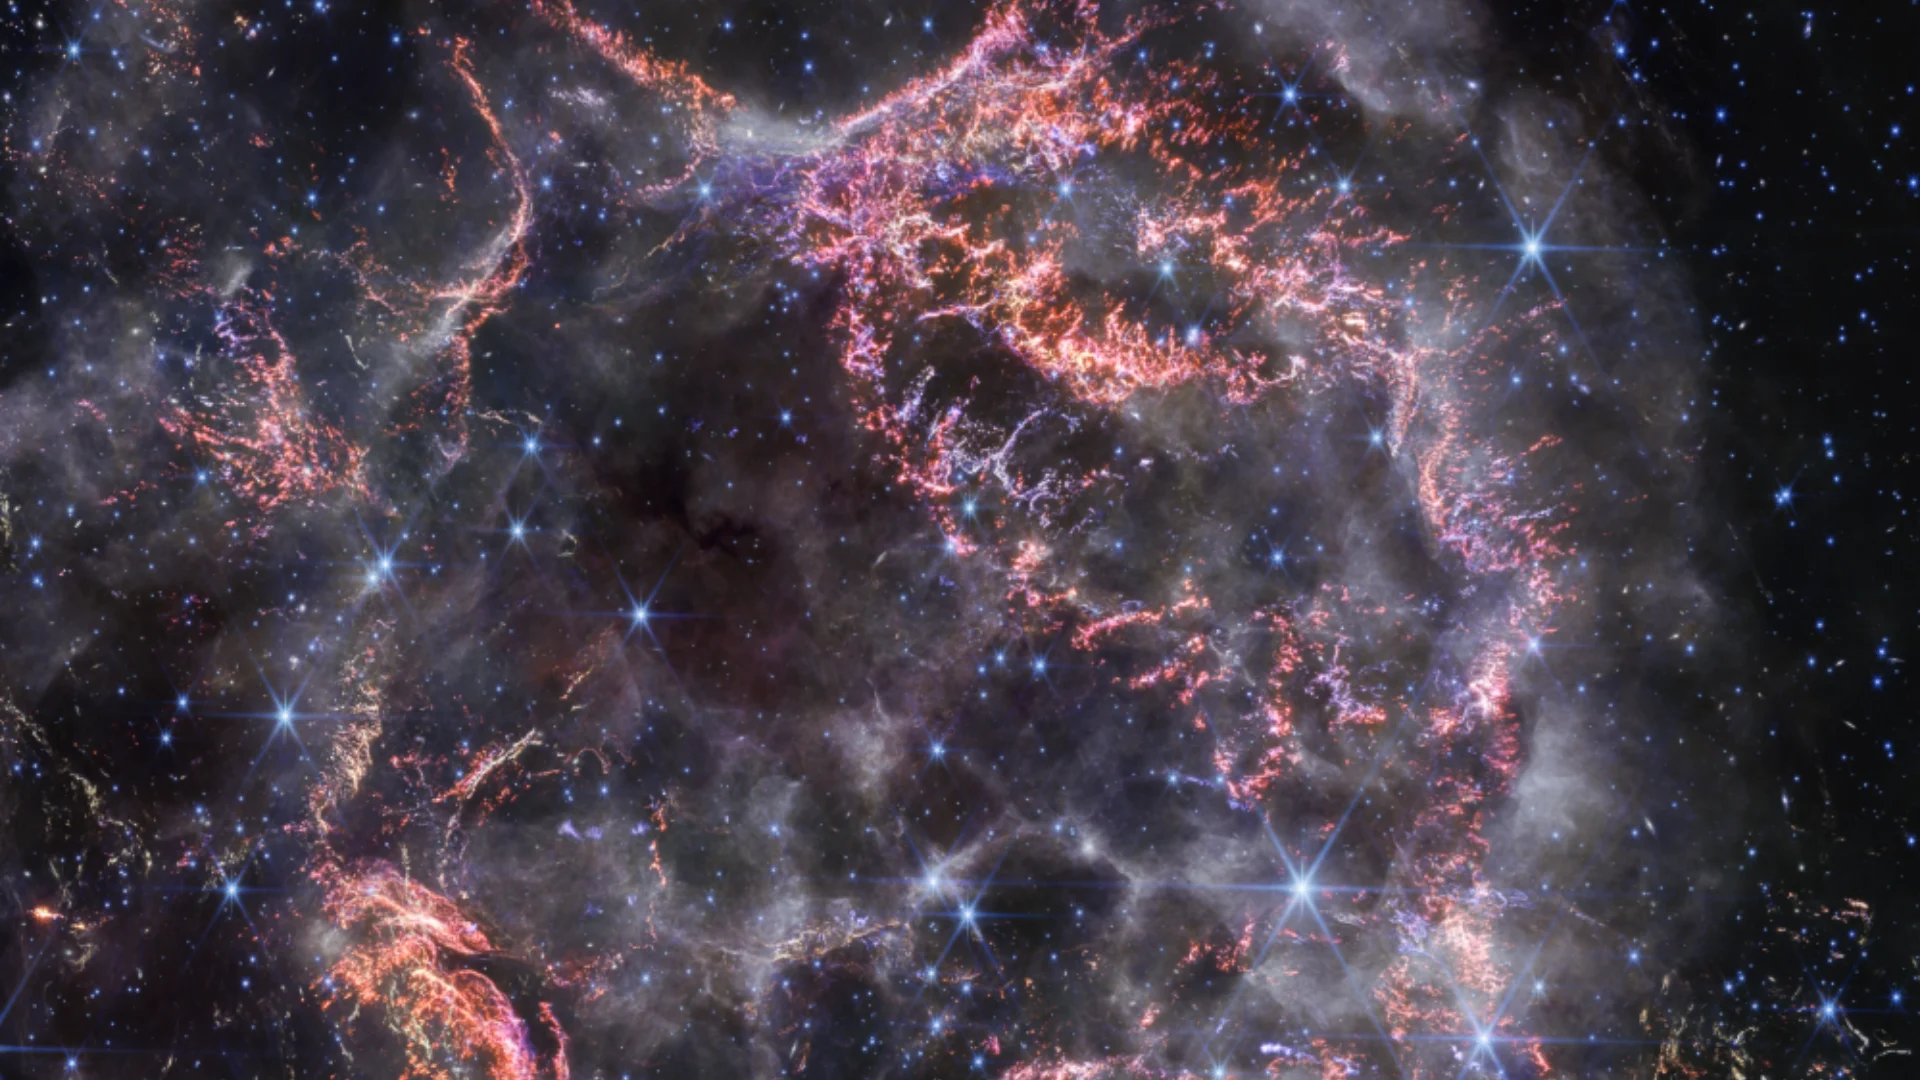 New NASA image features high-definition depiction of exploded star